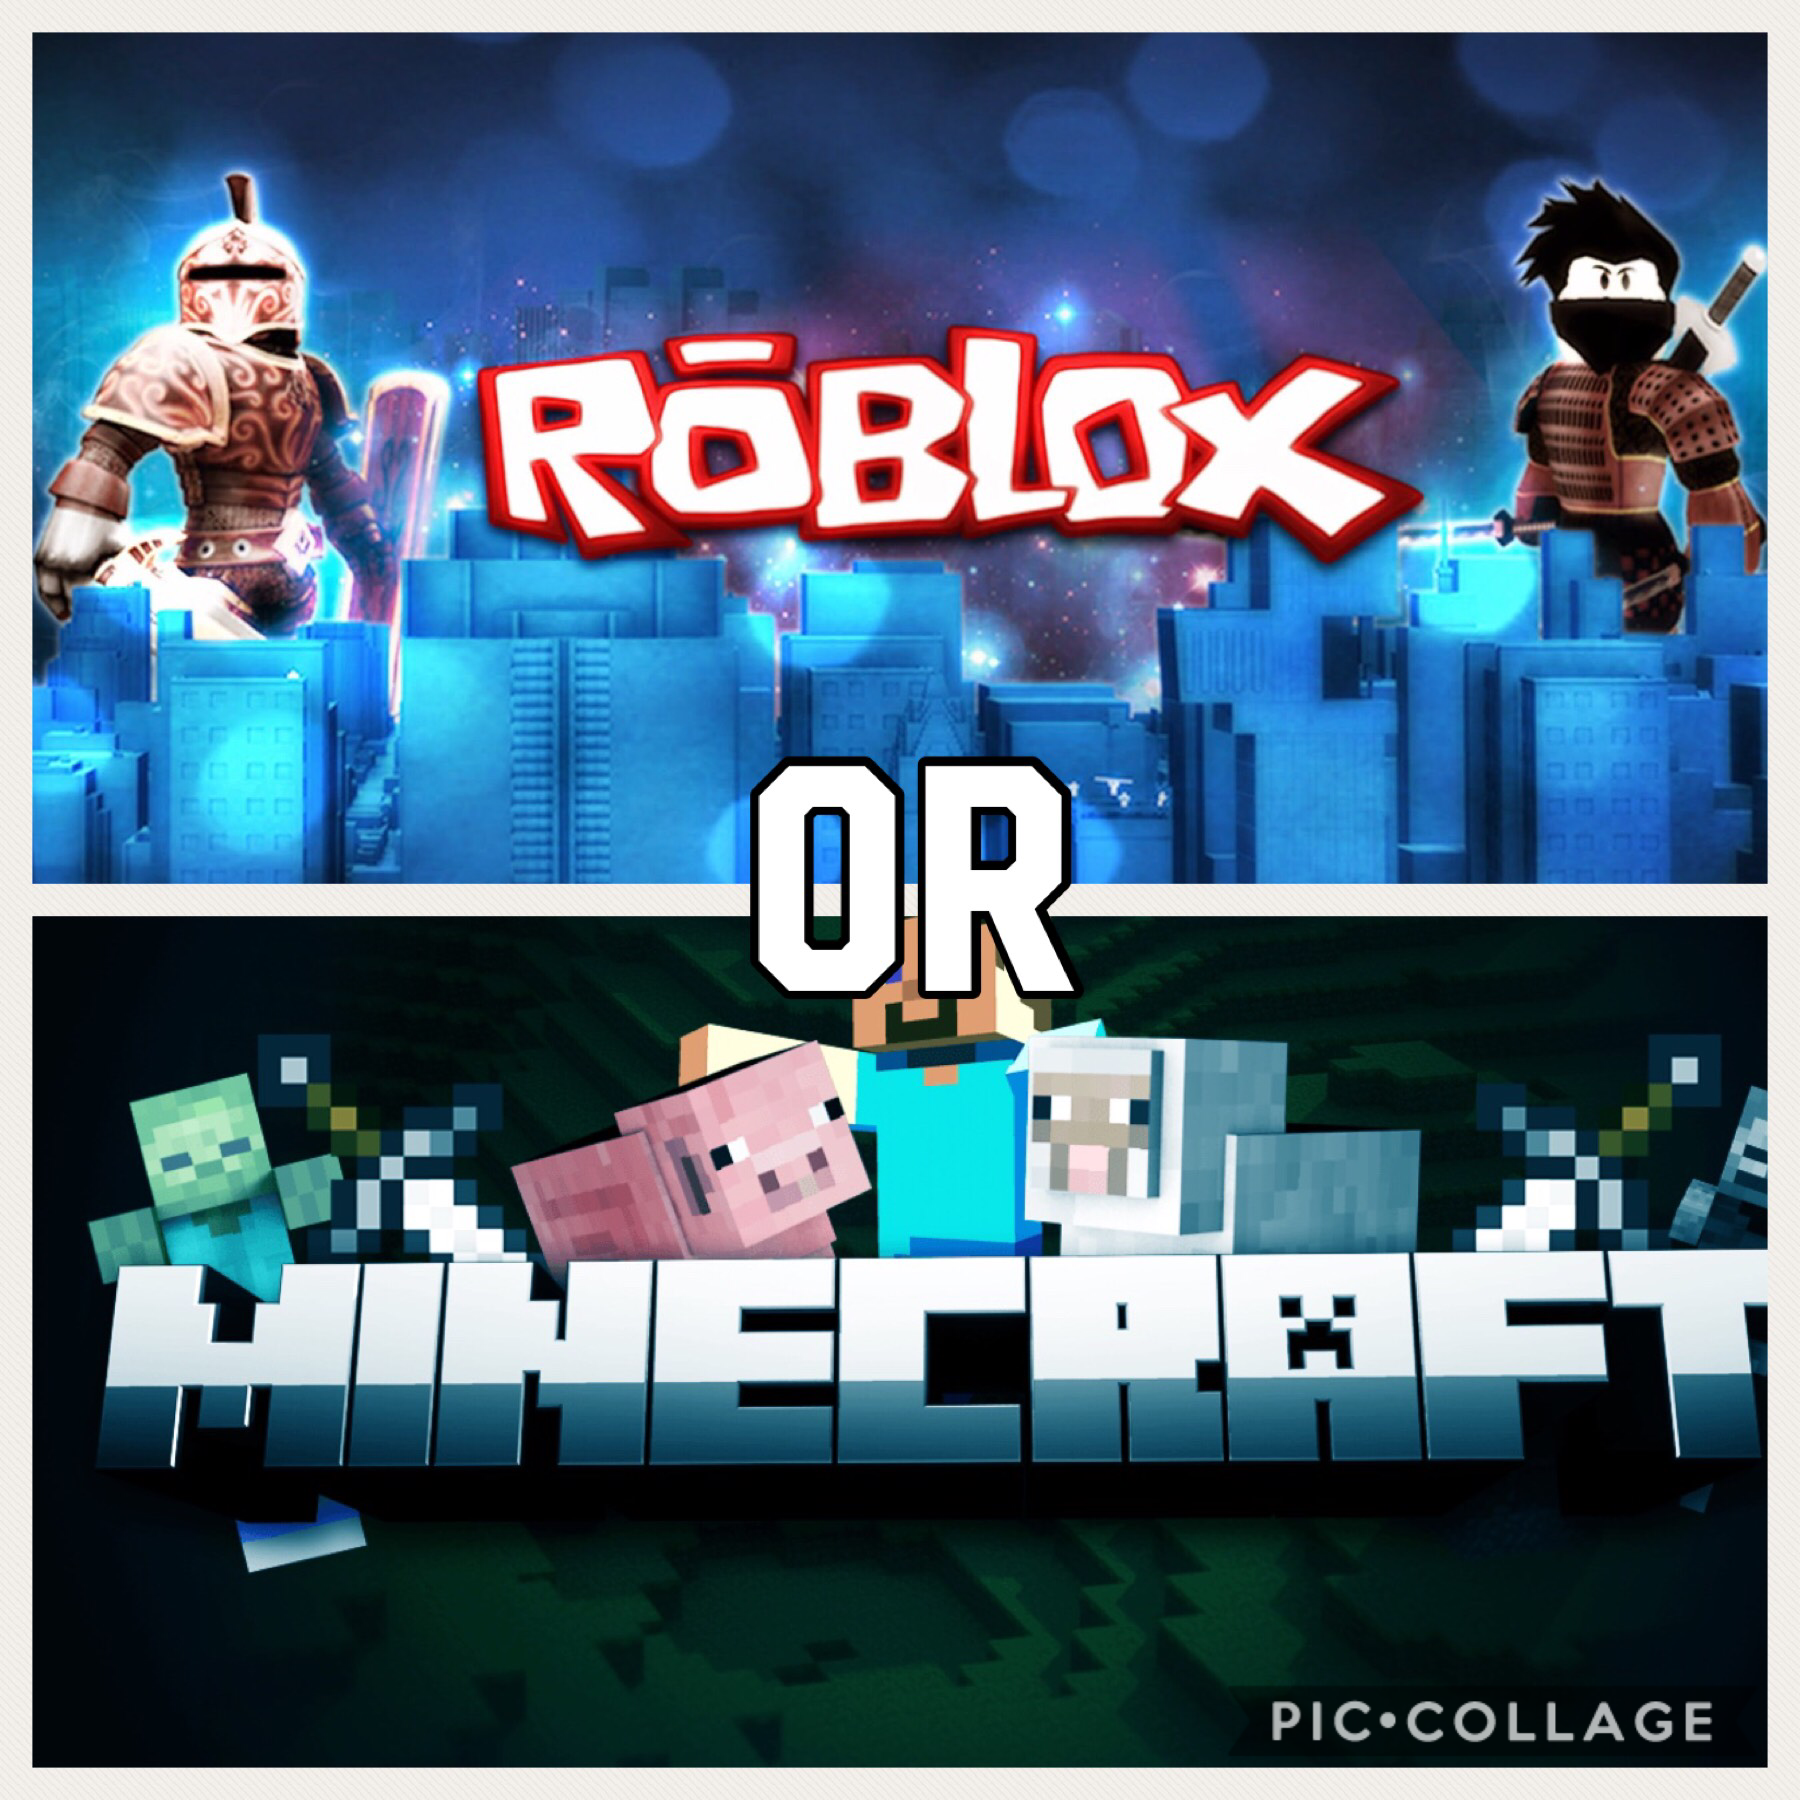 Which is your favorite video game ROBLOX or Minecraft 